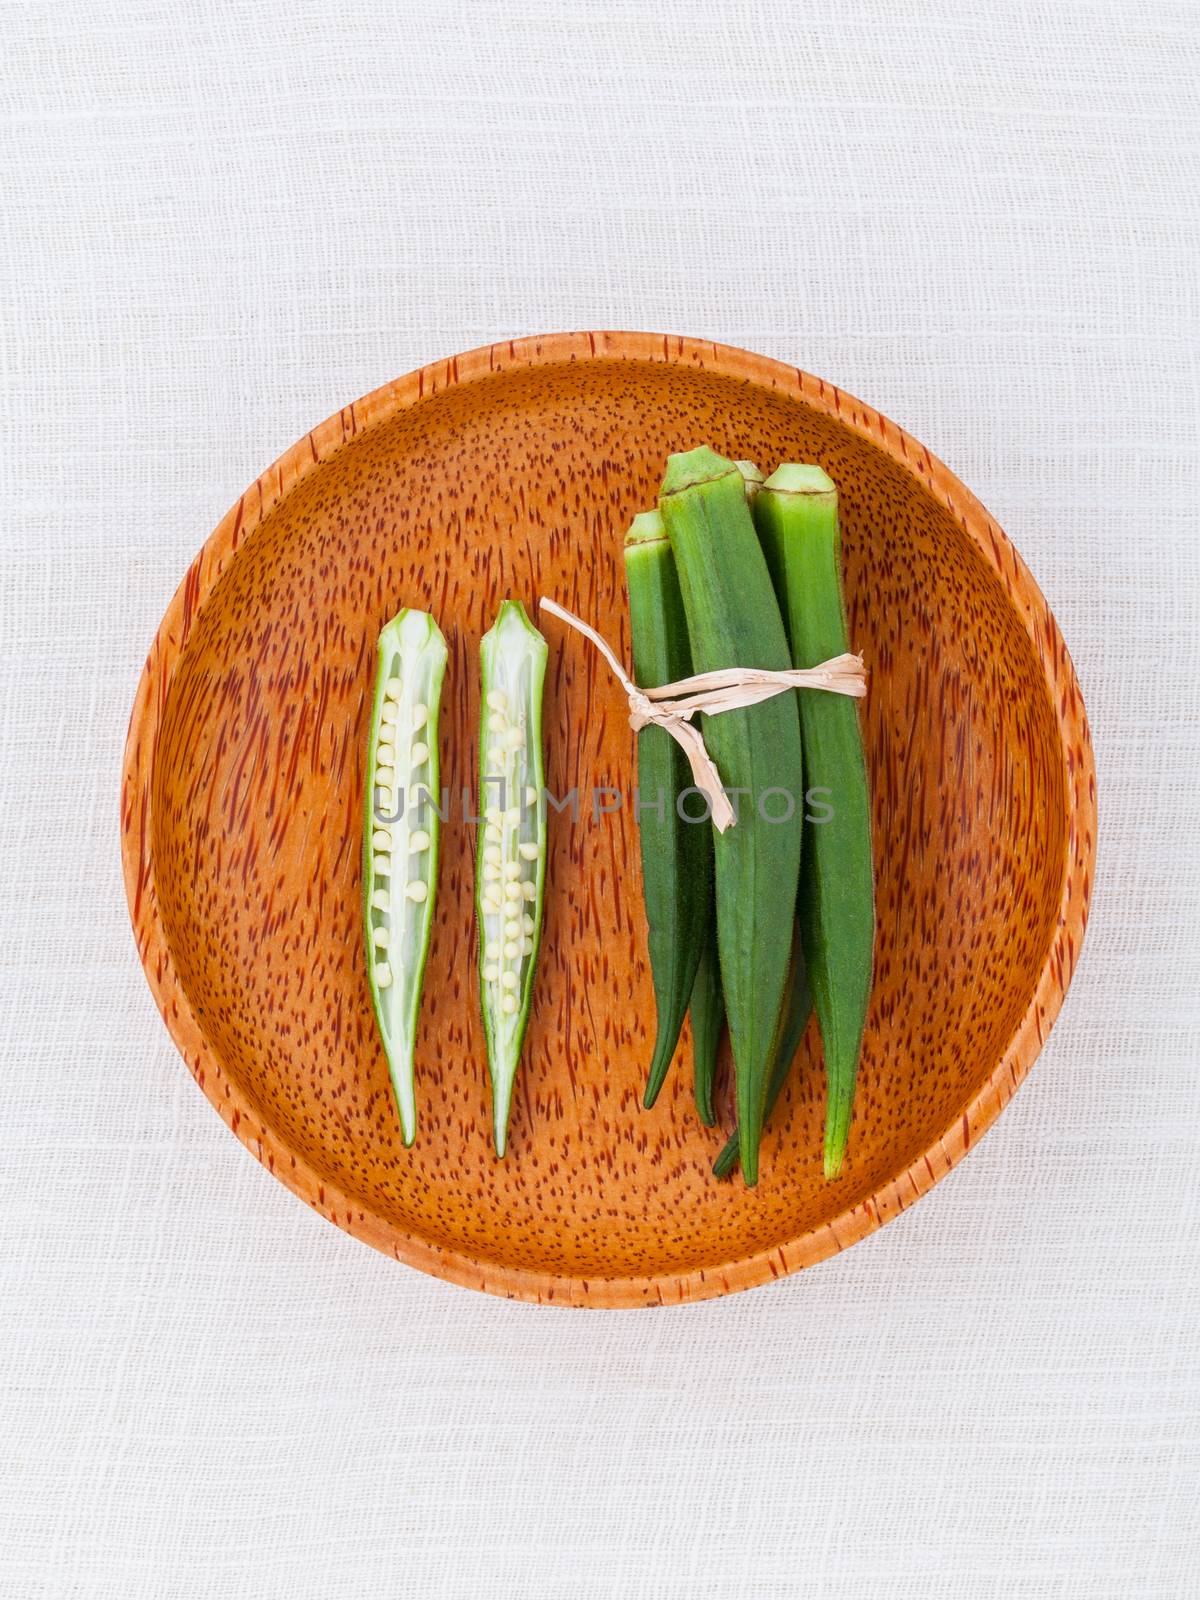 Lady 's Fingers or Okra clean and healthy food on white table . by kerdkanno